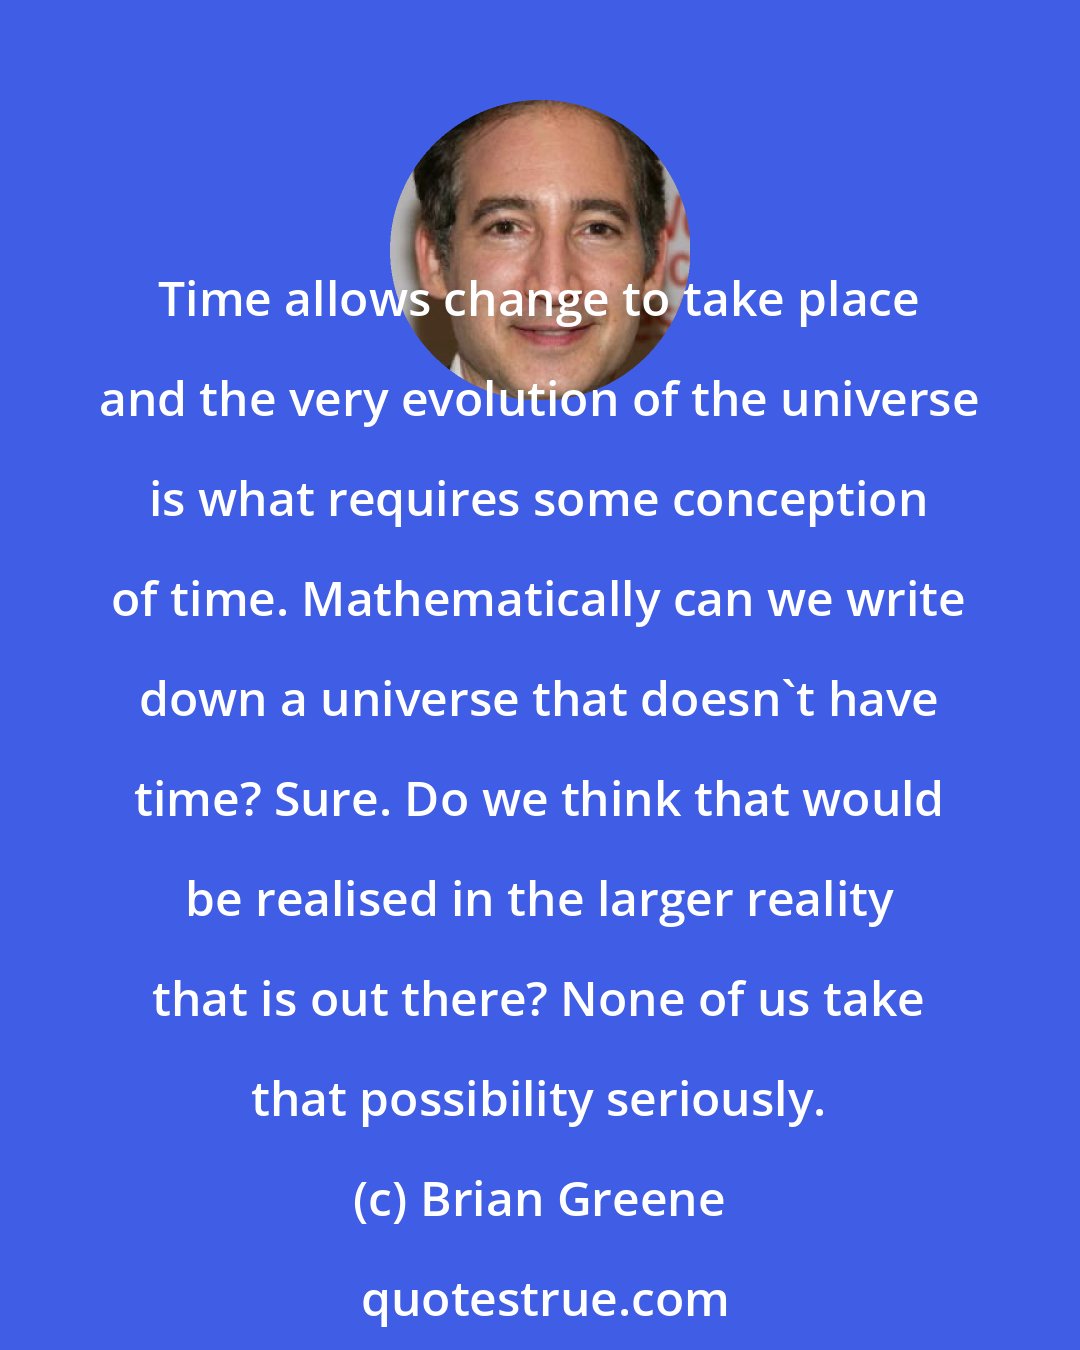 Brian Greene: Time allows change to take place and the very evolution of the universe is what requires some conception of time. Mathematically can we write down a universe that doesn't have time? Sure. Do we think that would be realised in the larger reality that is out there? None of us take that possibility seriously.